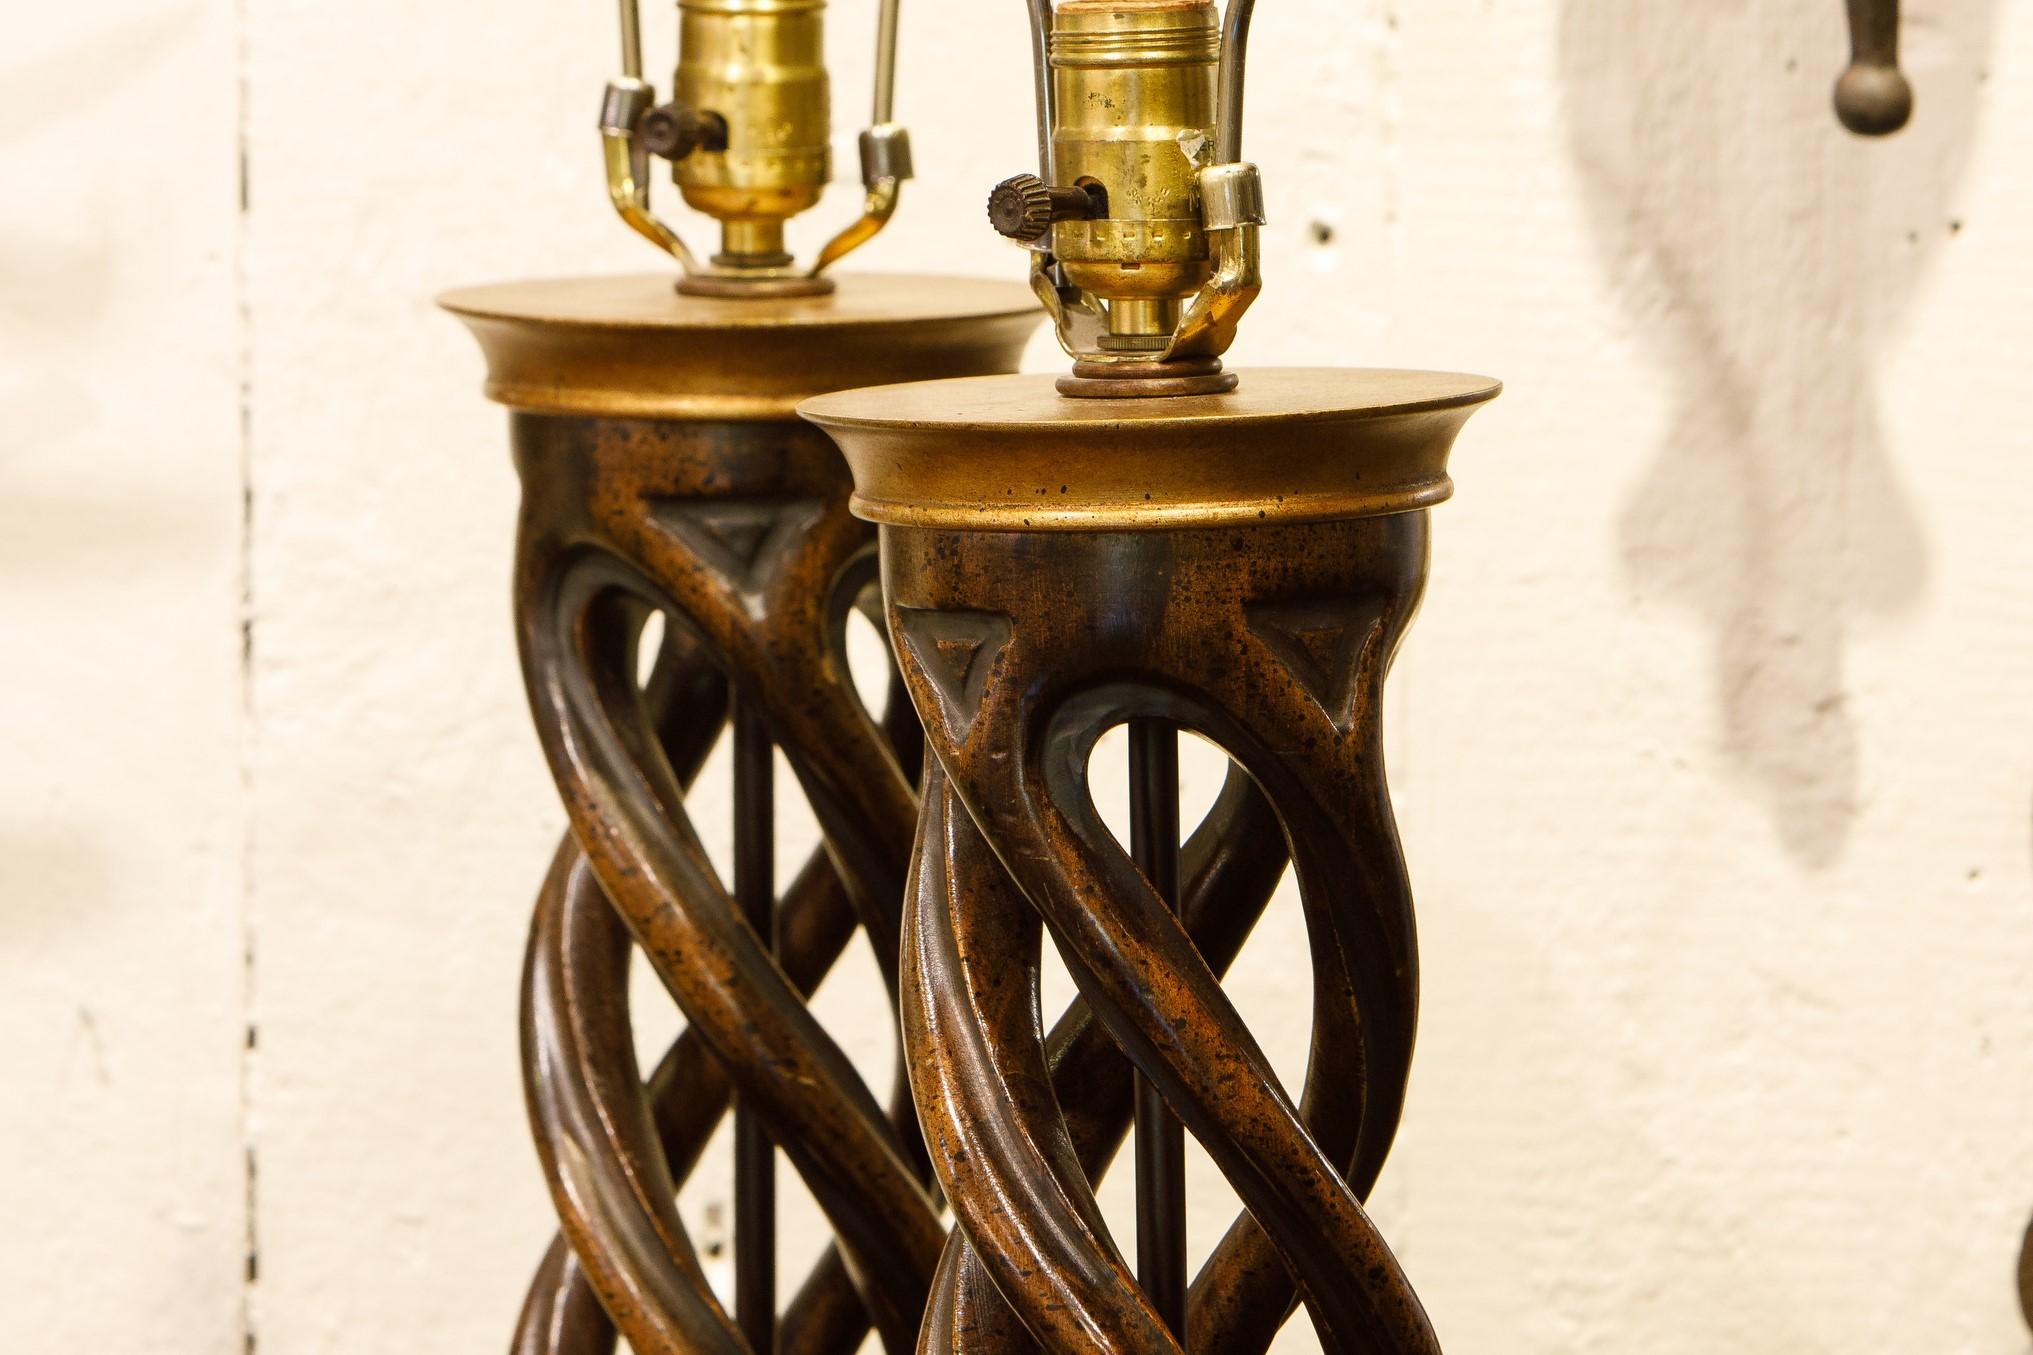 American Pair of Frederick Cooper “Helix” Table Lamps For Sale